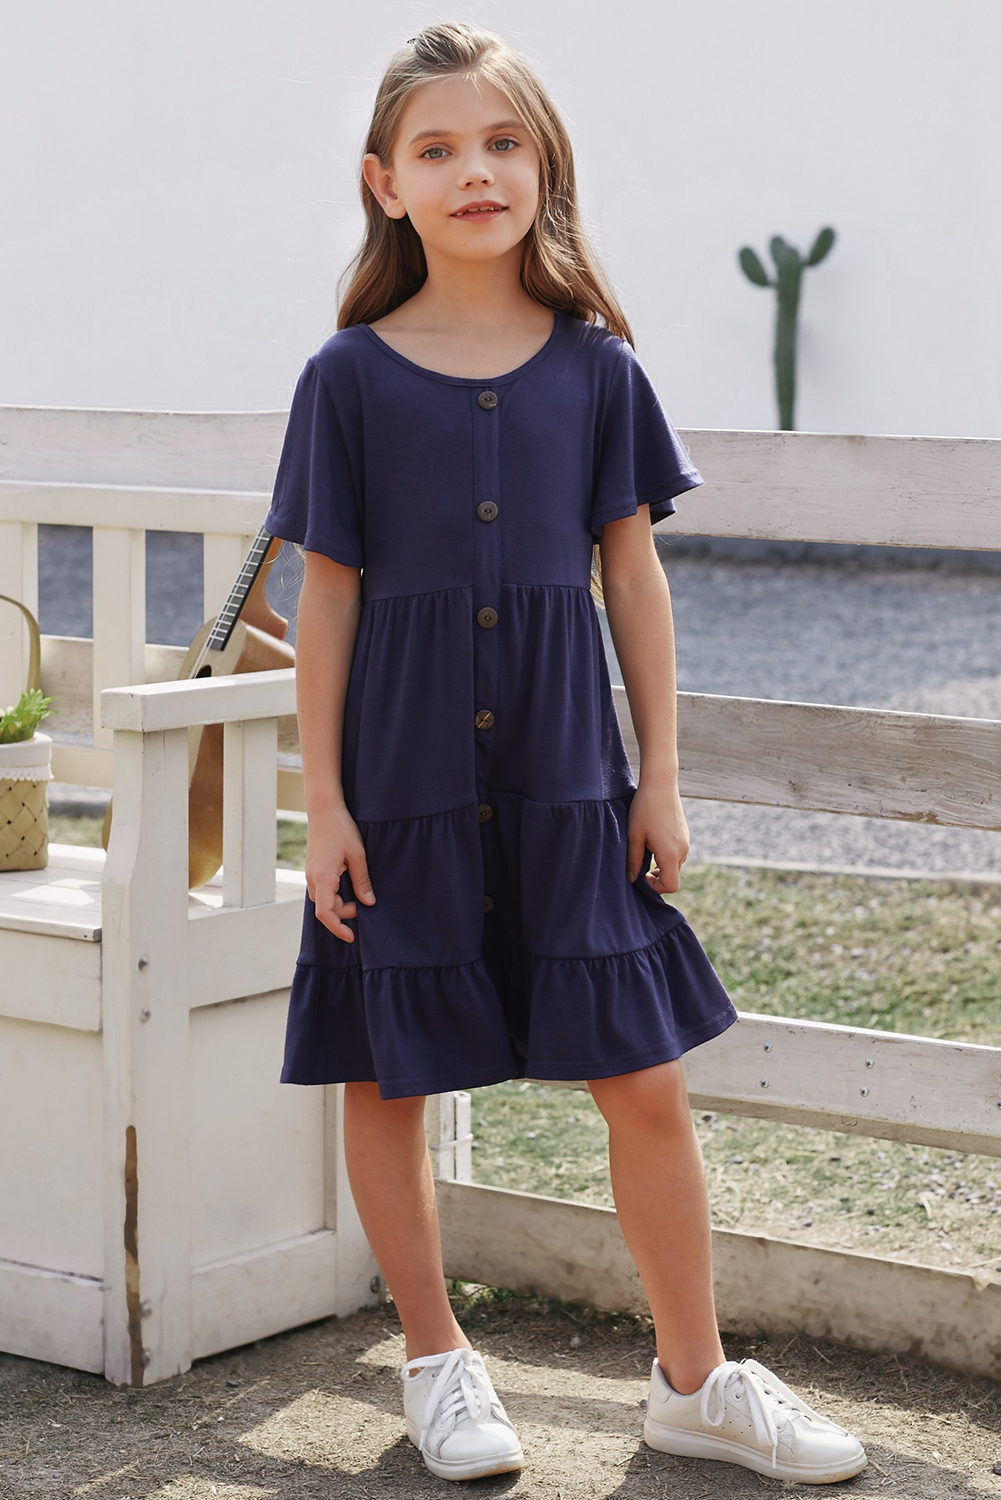 Blue Flutter Sleeves Tiered Girls’ Dress With Buttons